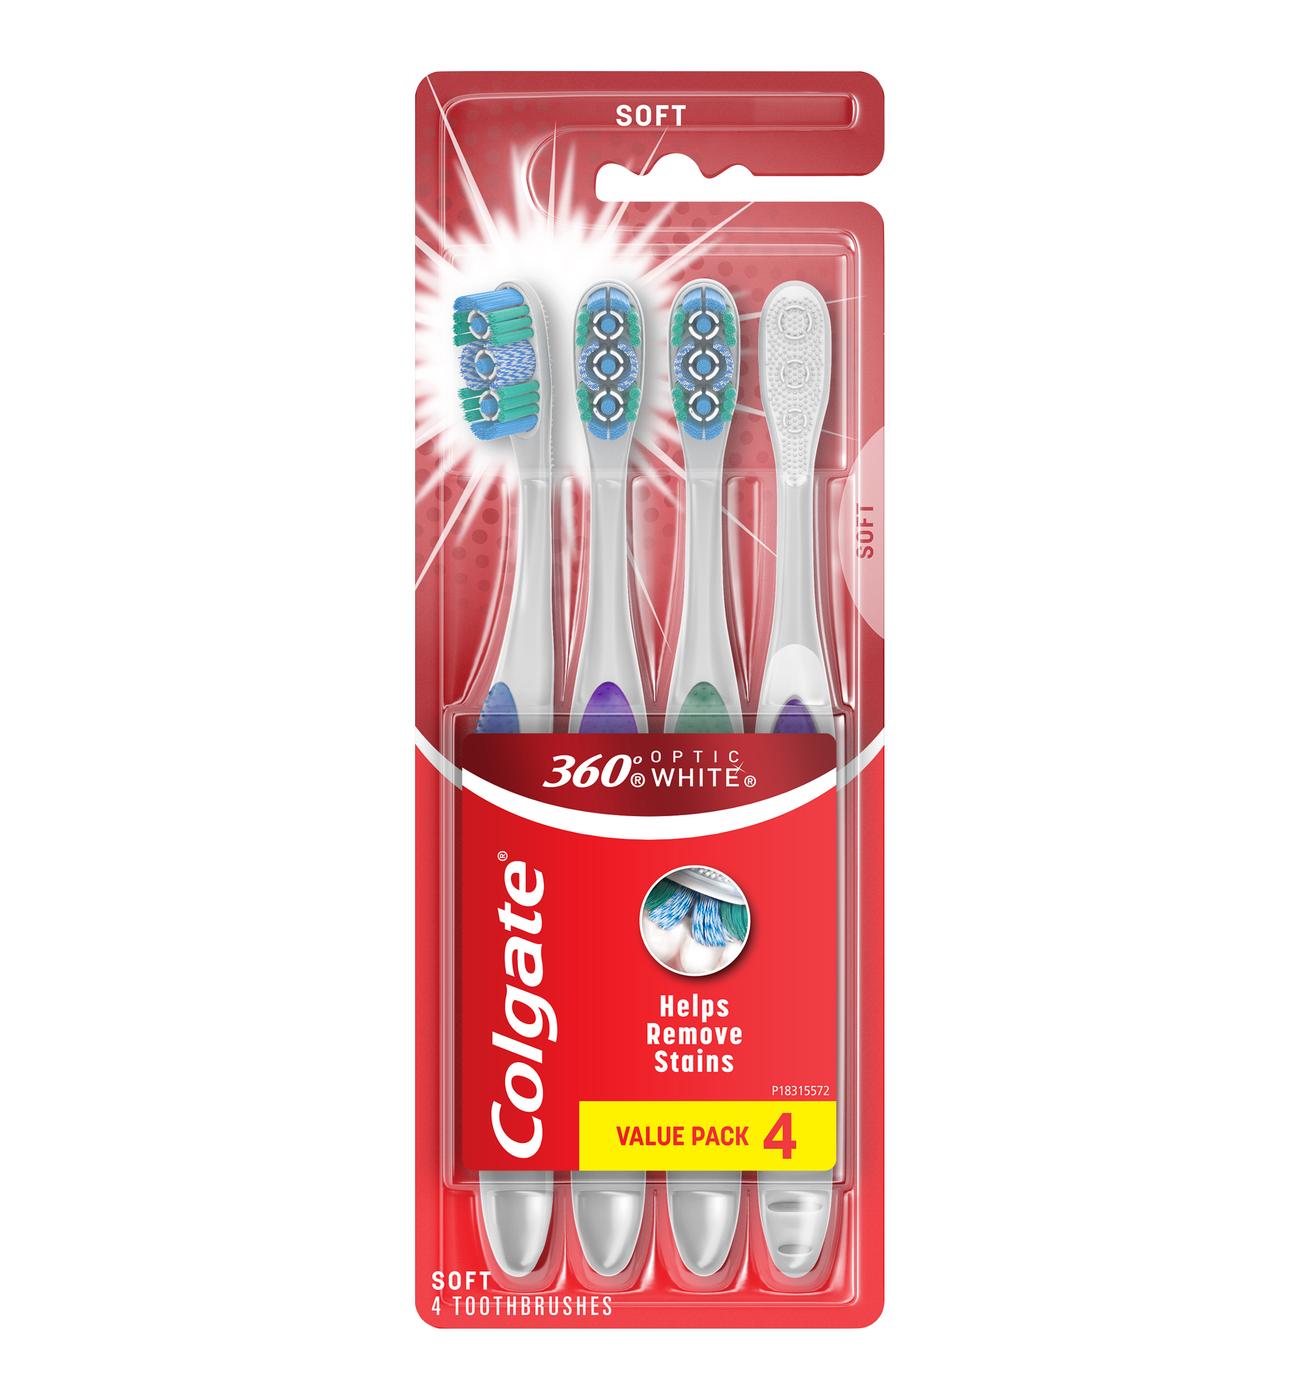 Colgate 360 Optic White Toothbrushes - Soft; image 1 of 9